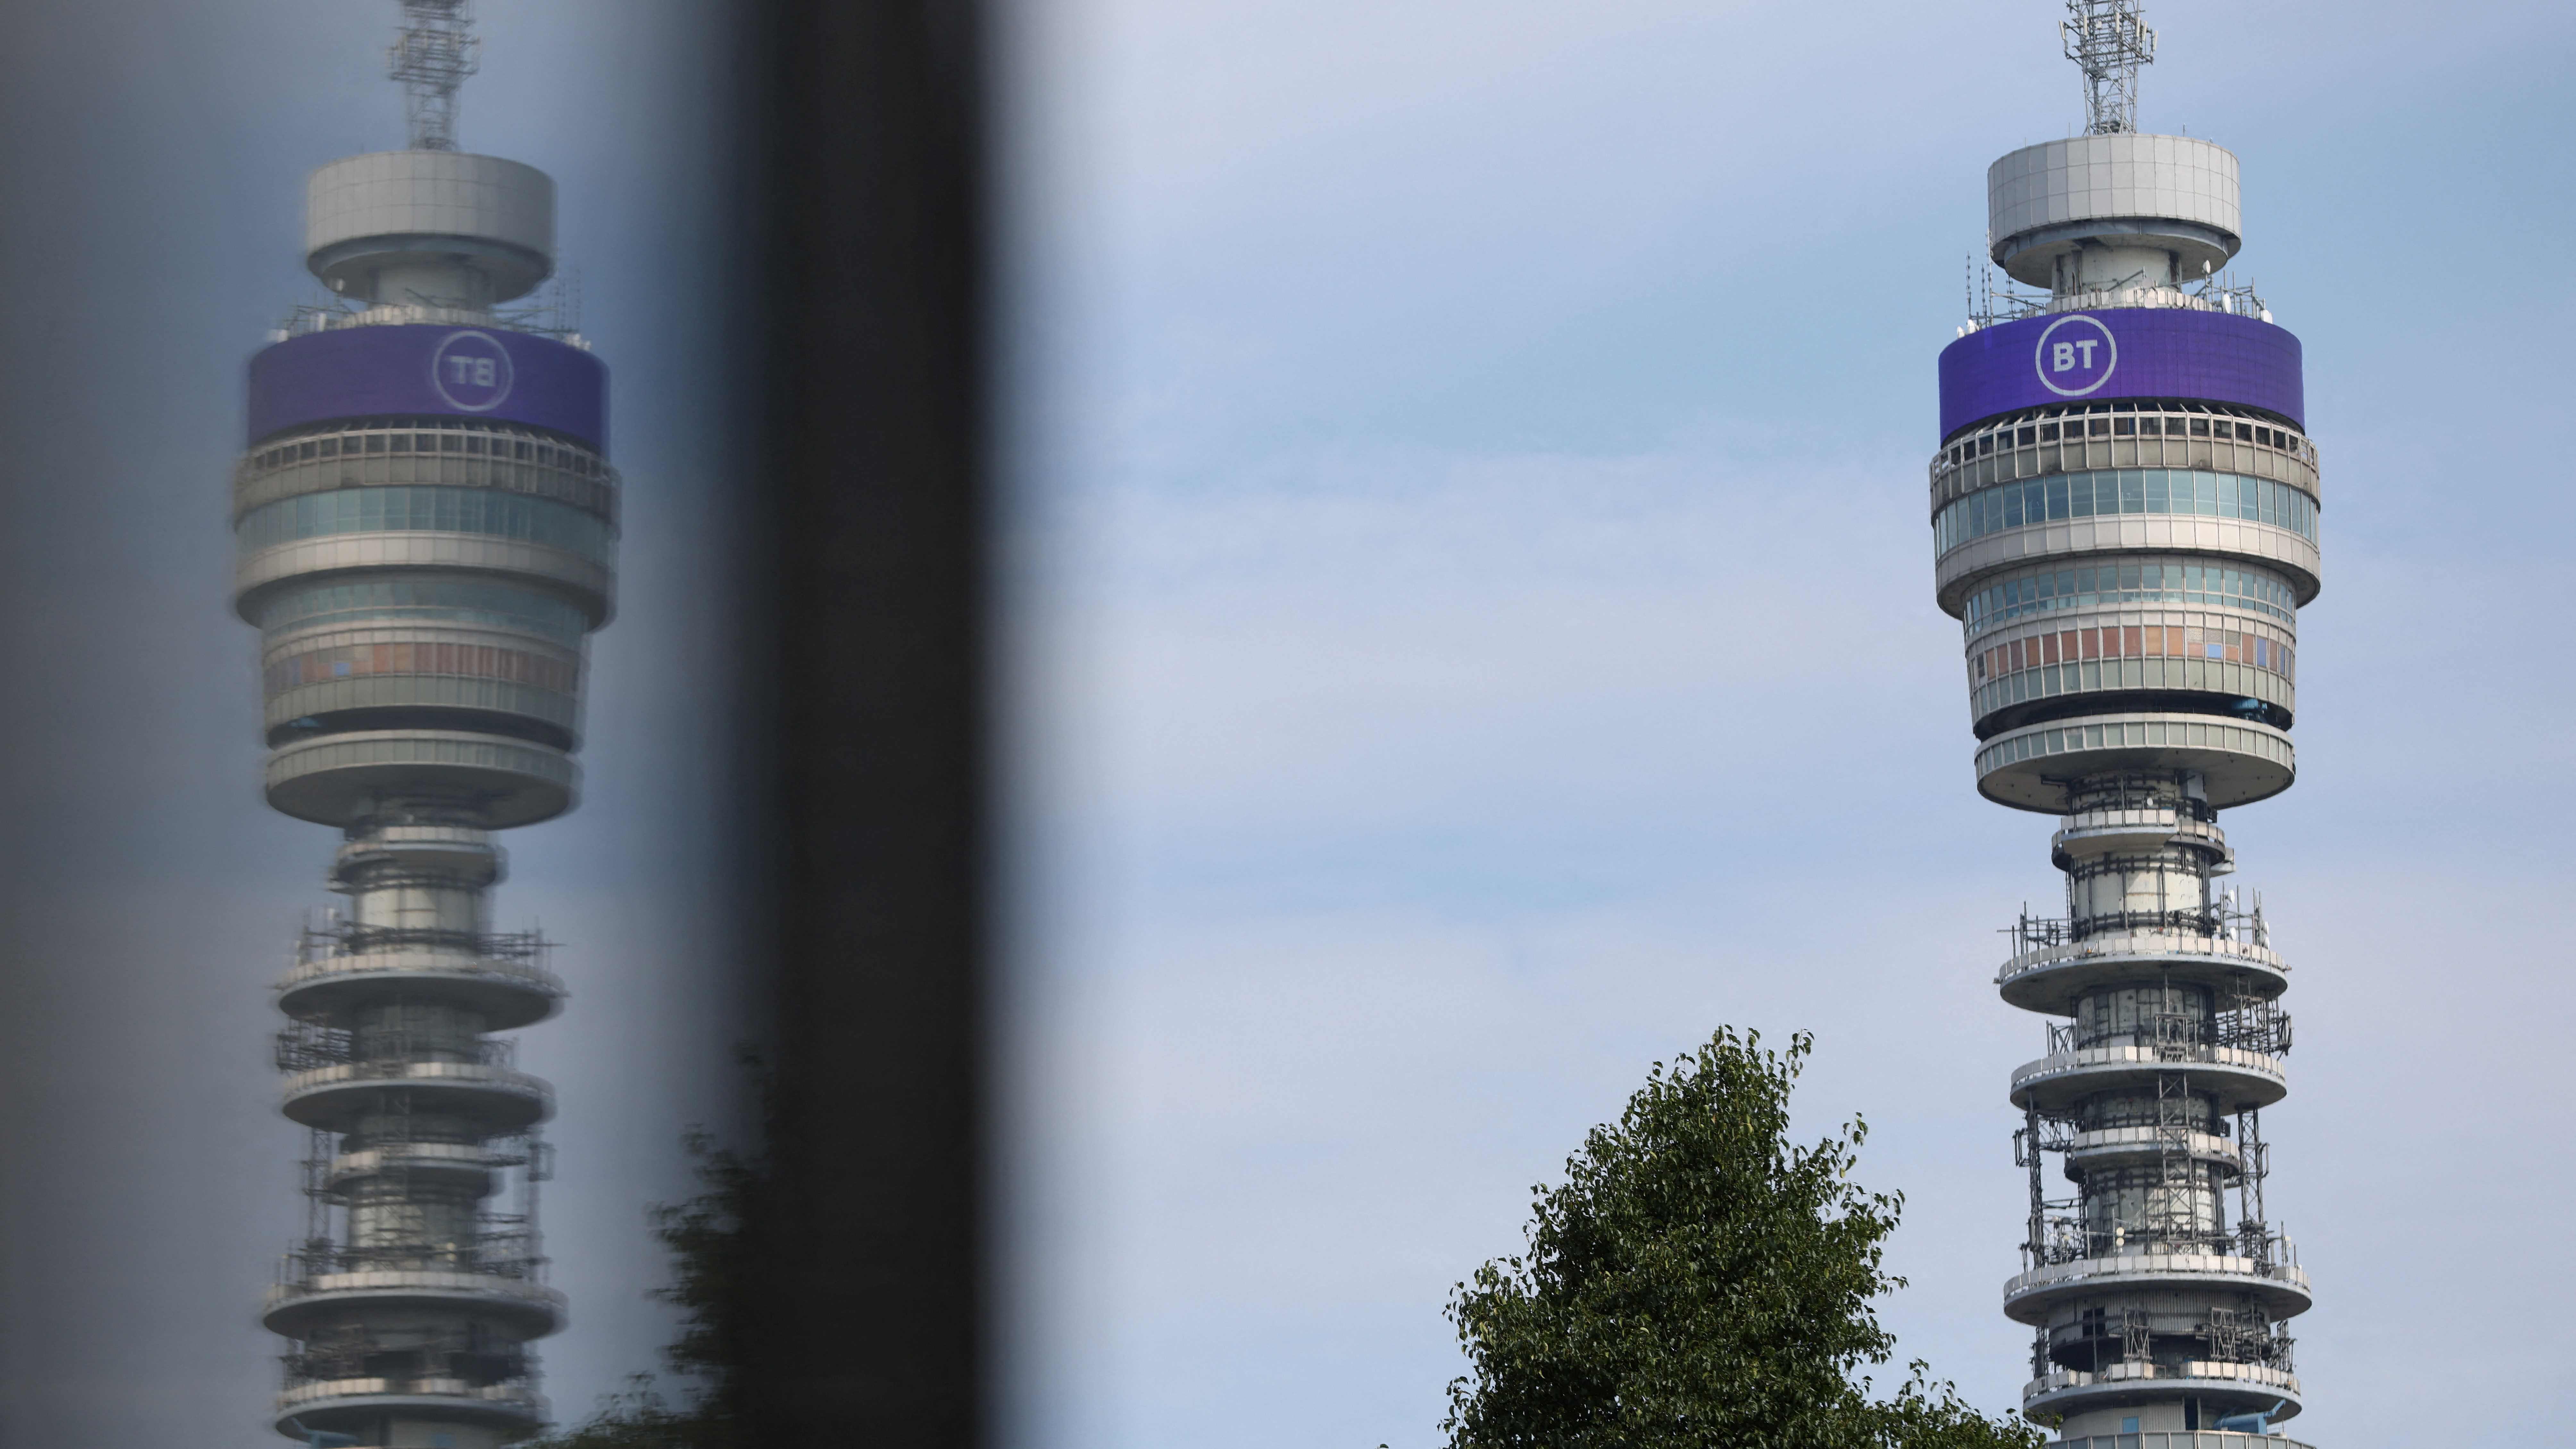 London's BT Tower To Become Hotel After £275 million Sale